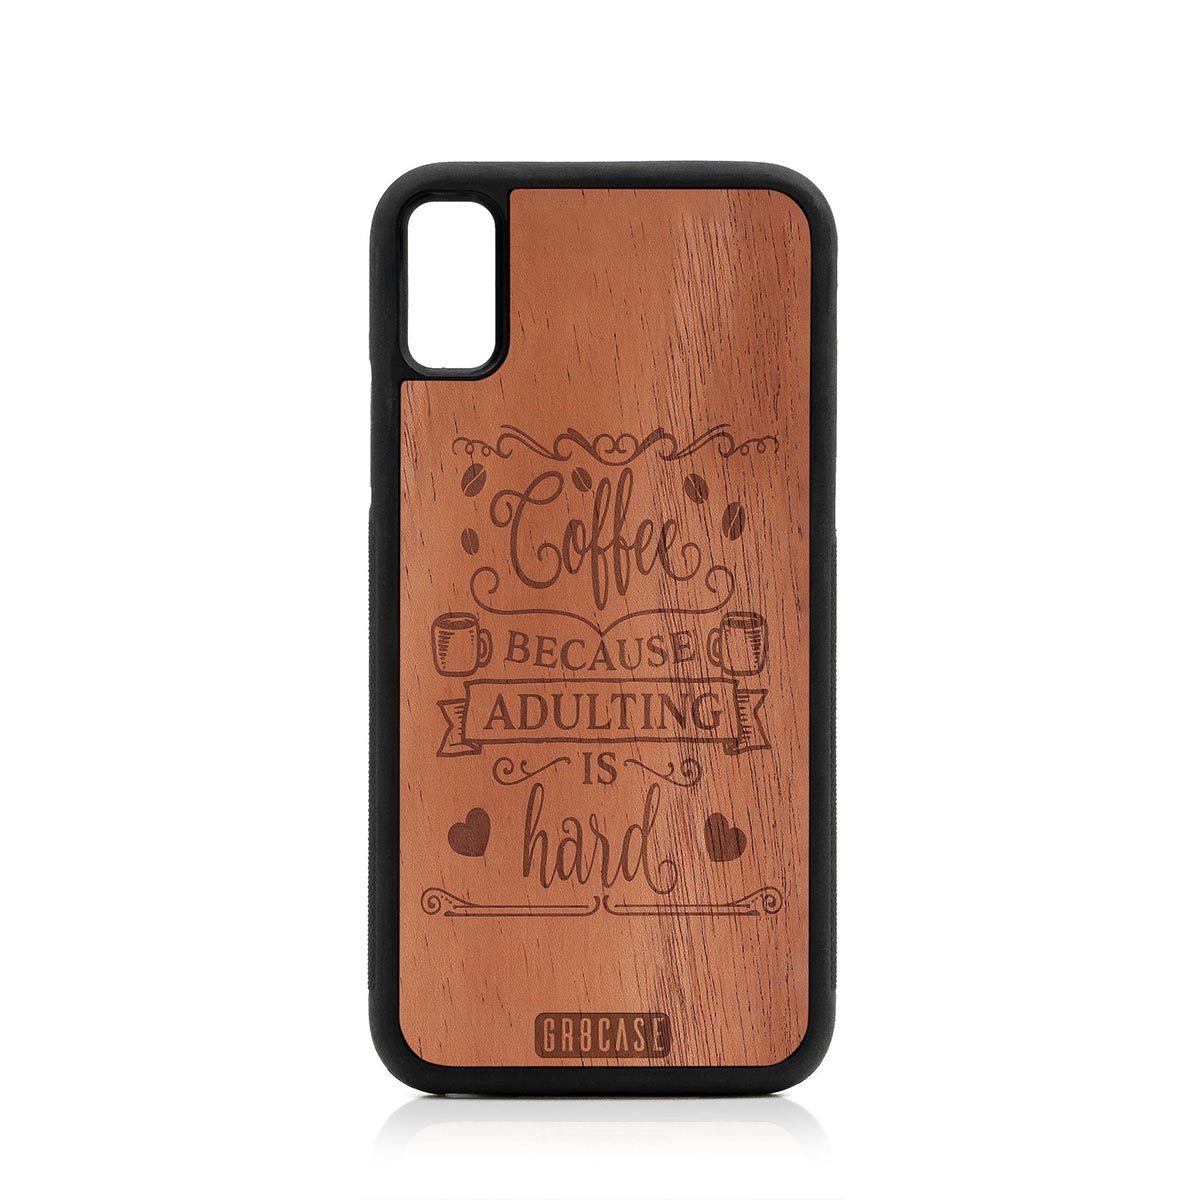 Coffee Because Adulting Is Hard Design Wood Case For iPhone XS Max by GR8CASE